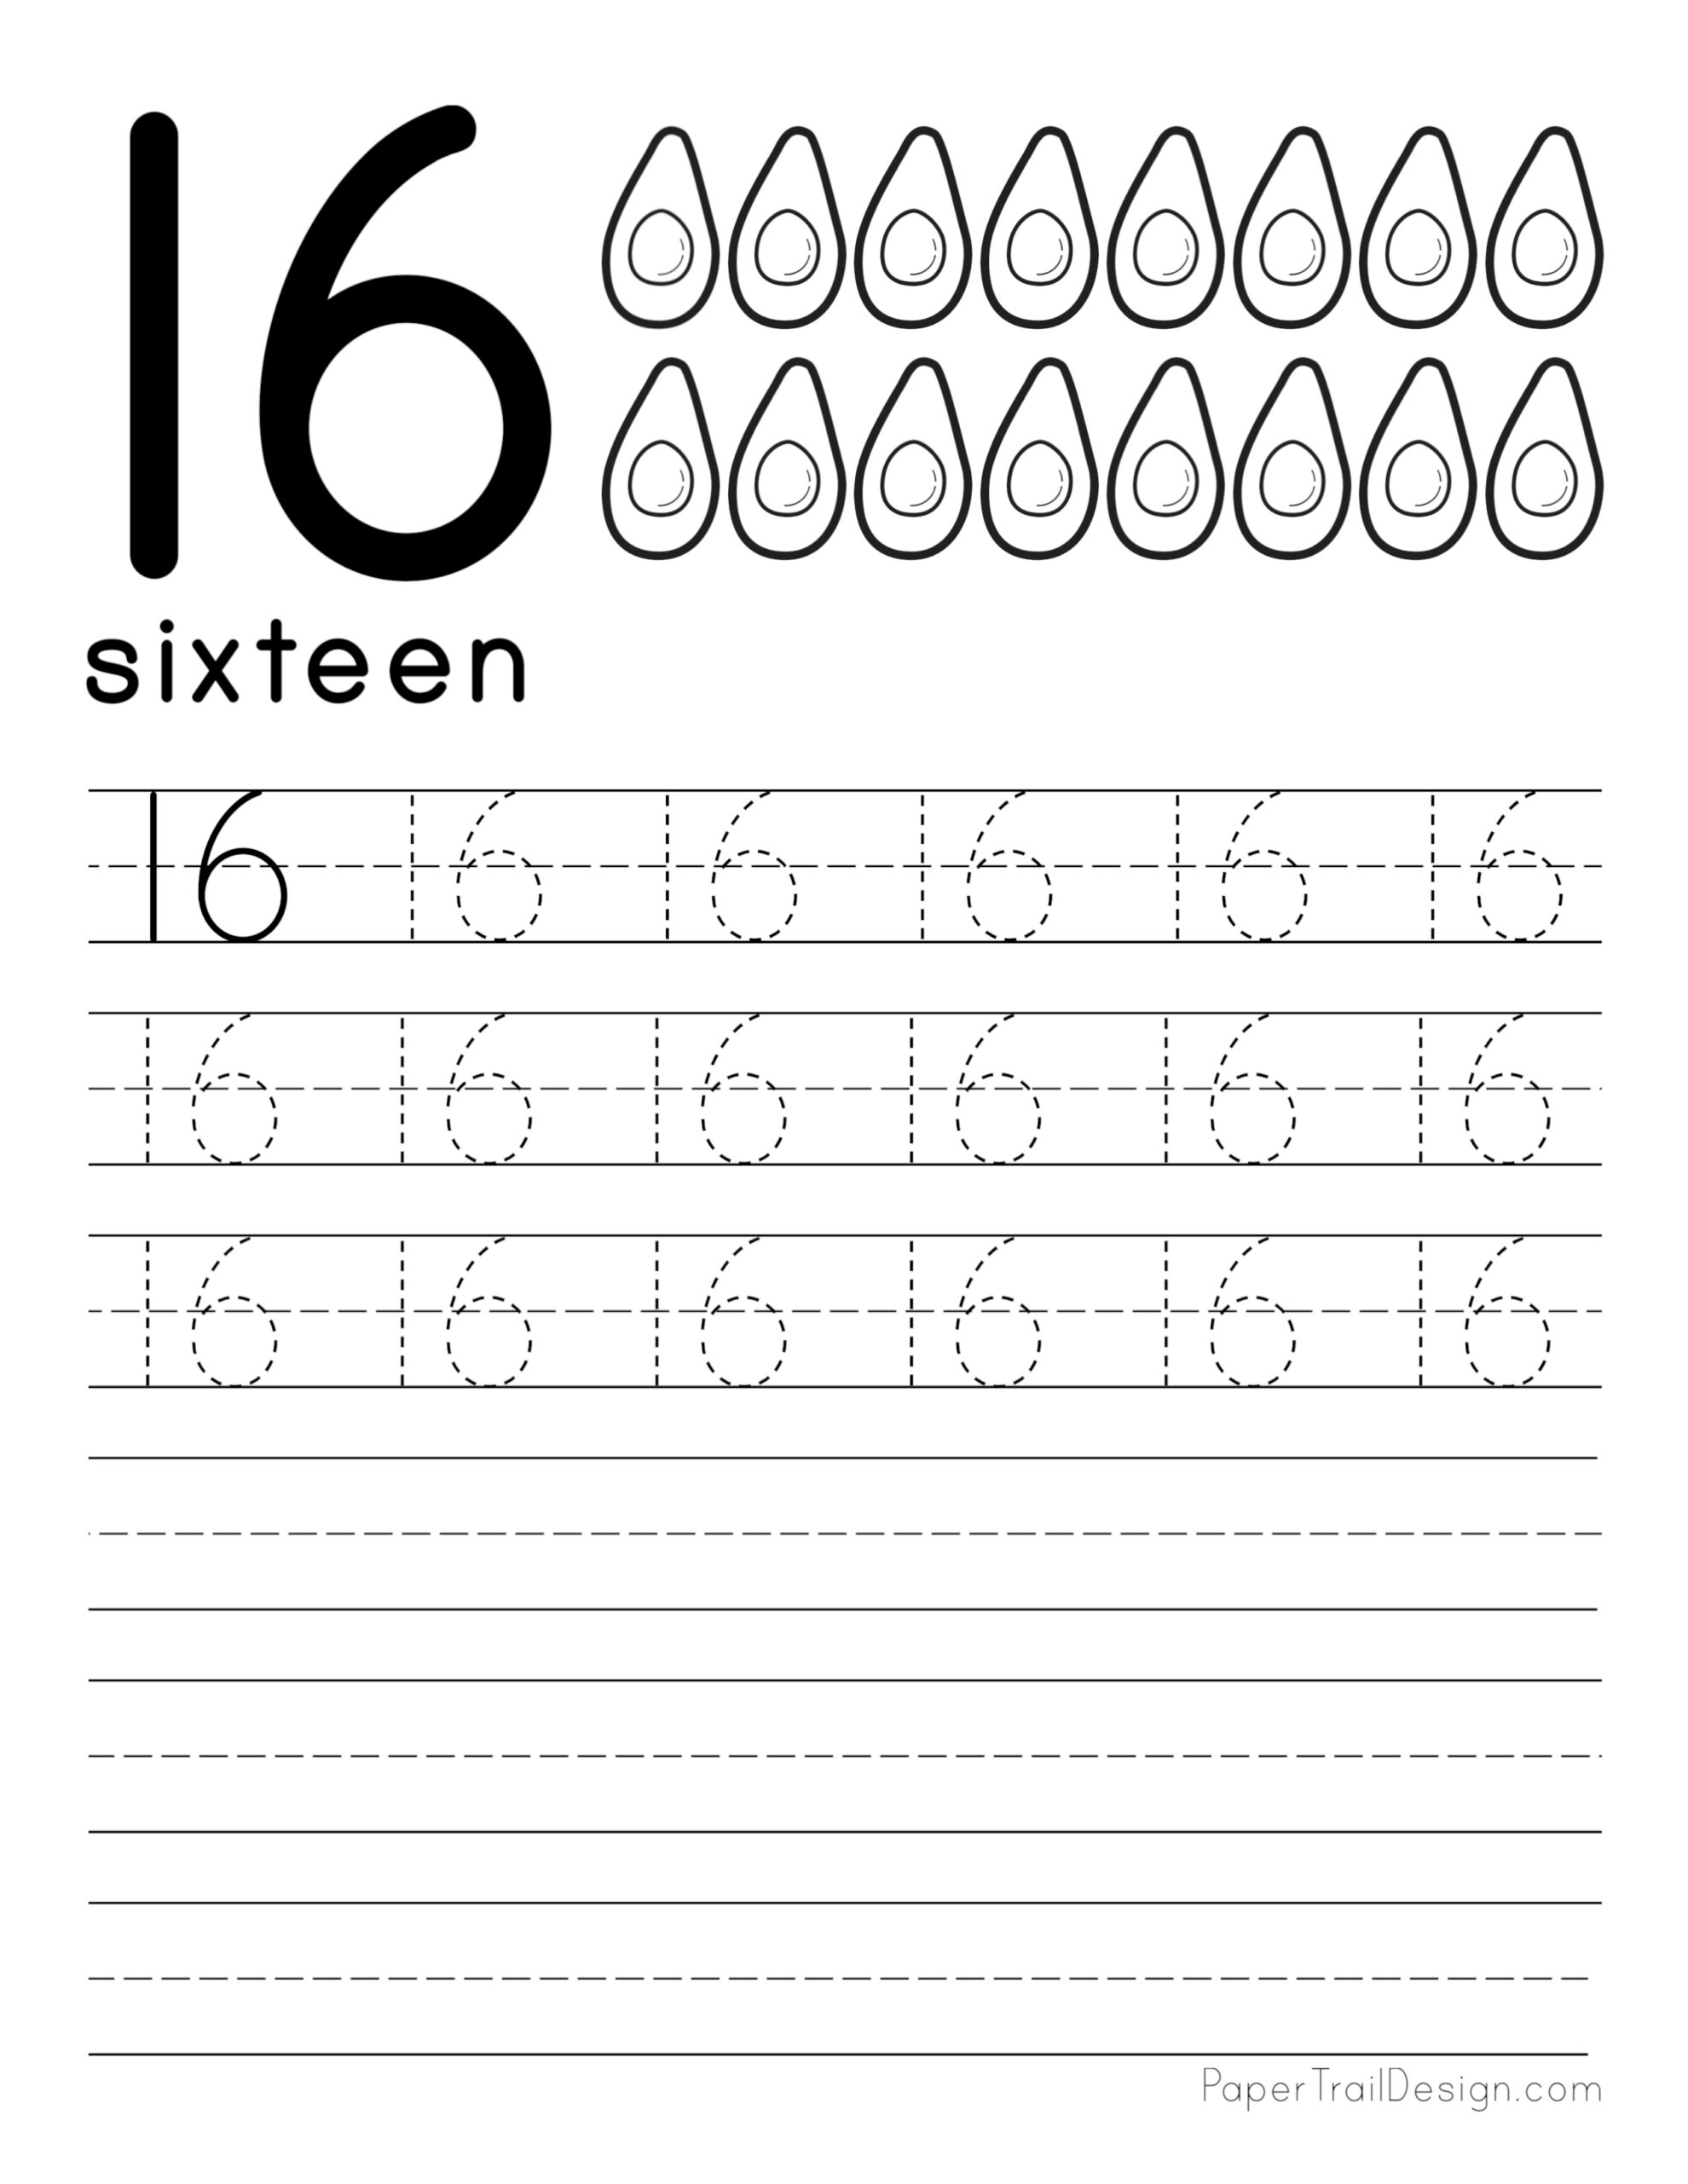 Free Number Tracing Worksheets Paper Trail Design